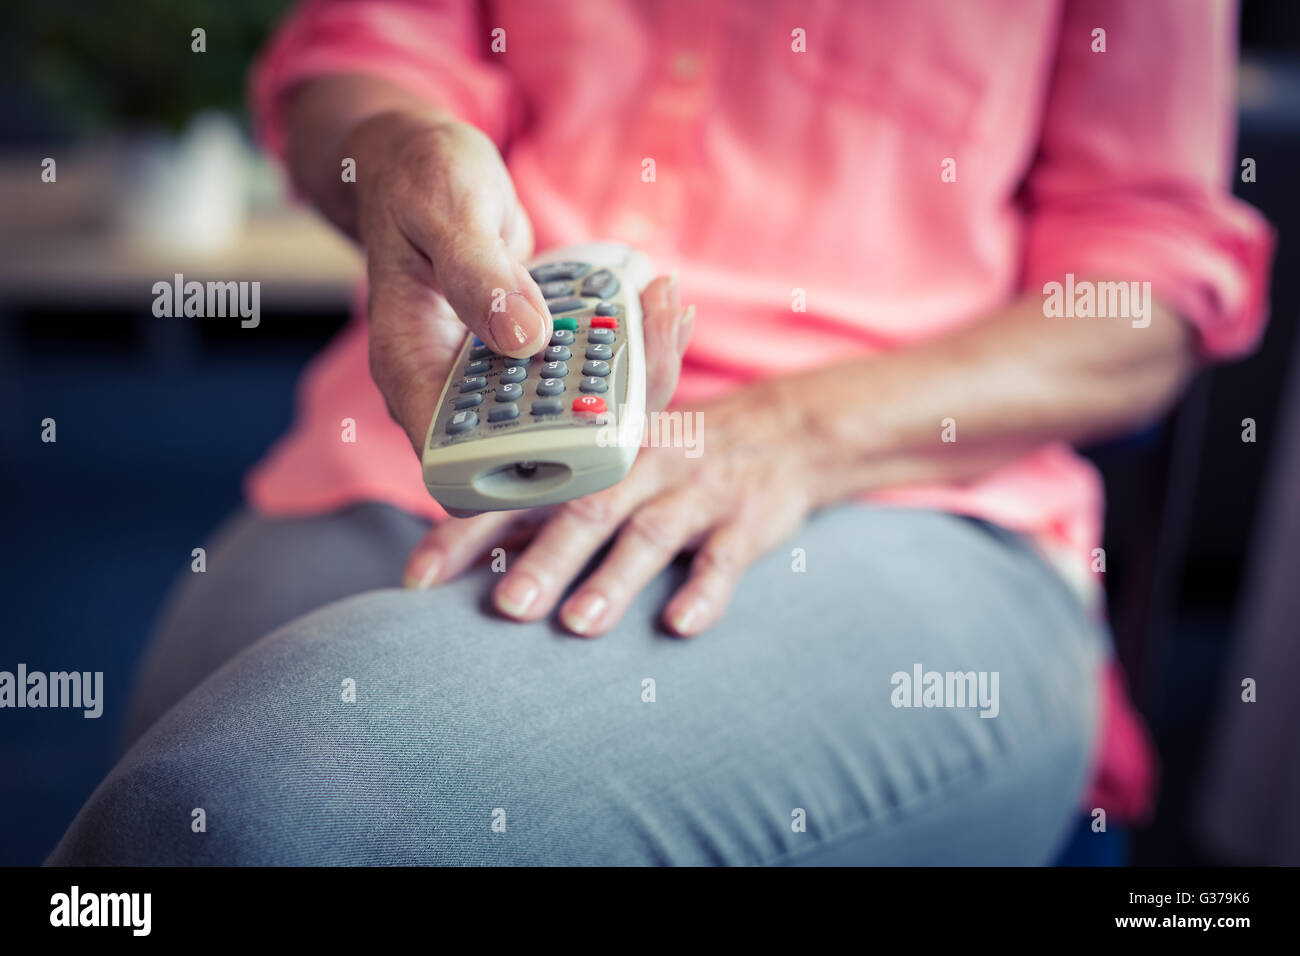 Senior woman changing tv channel Stock Photo